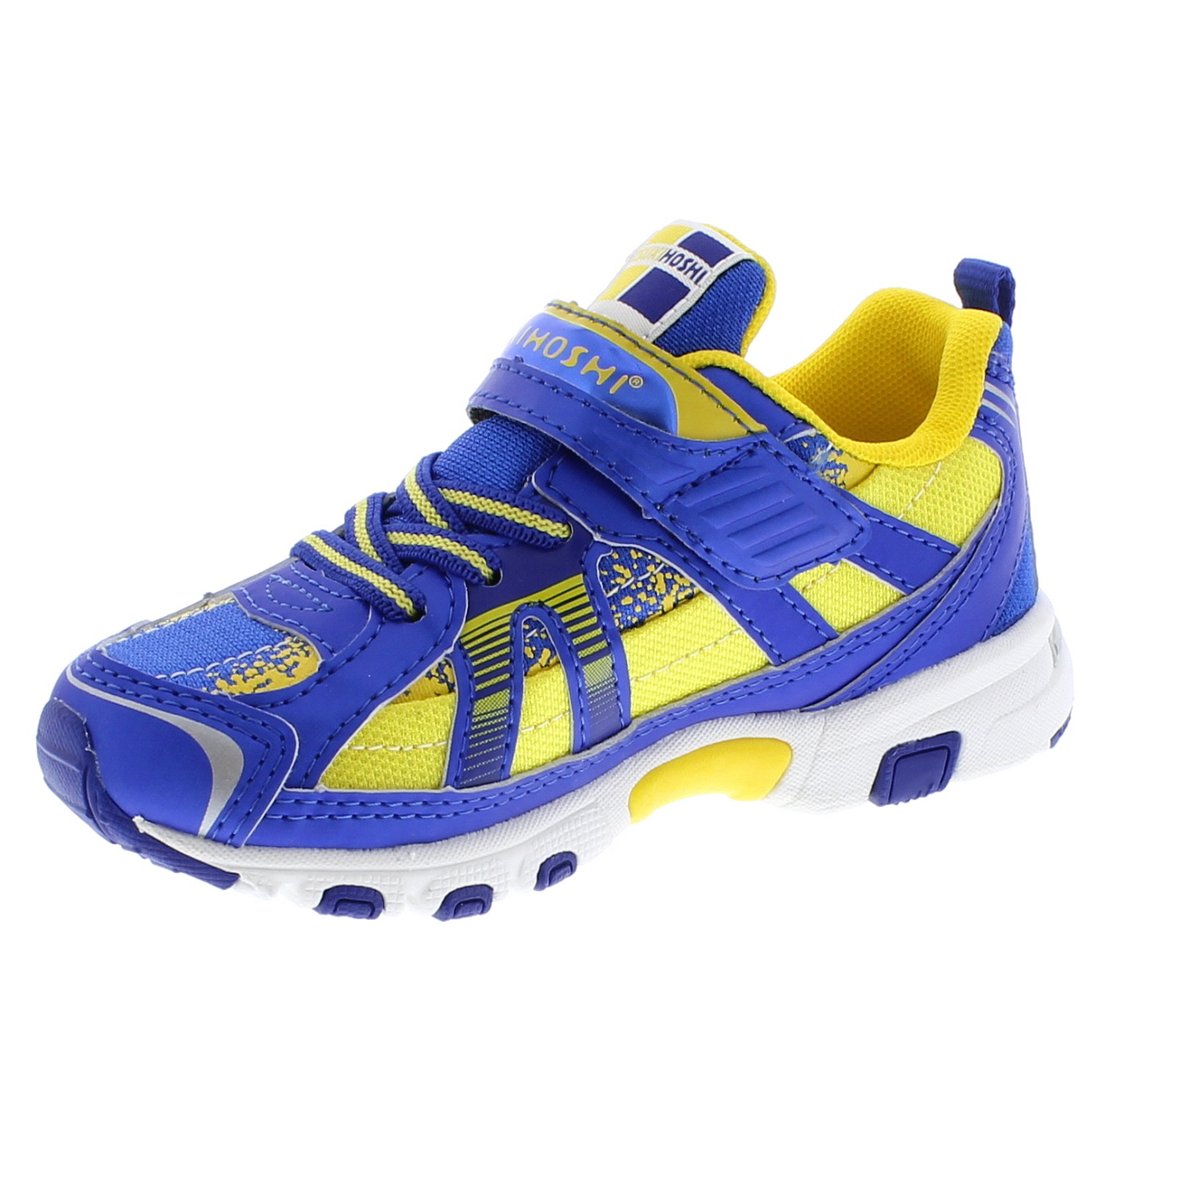 Child Tsukihoshi Storm Sneaker in Royal/Gold from the front view